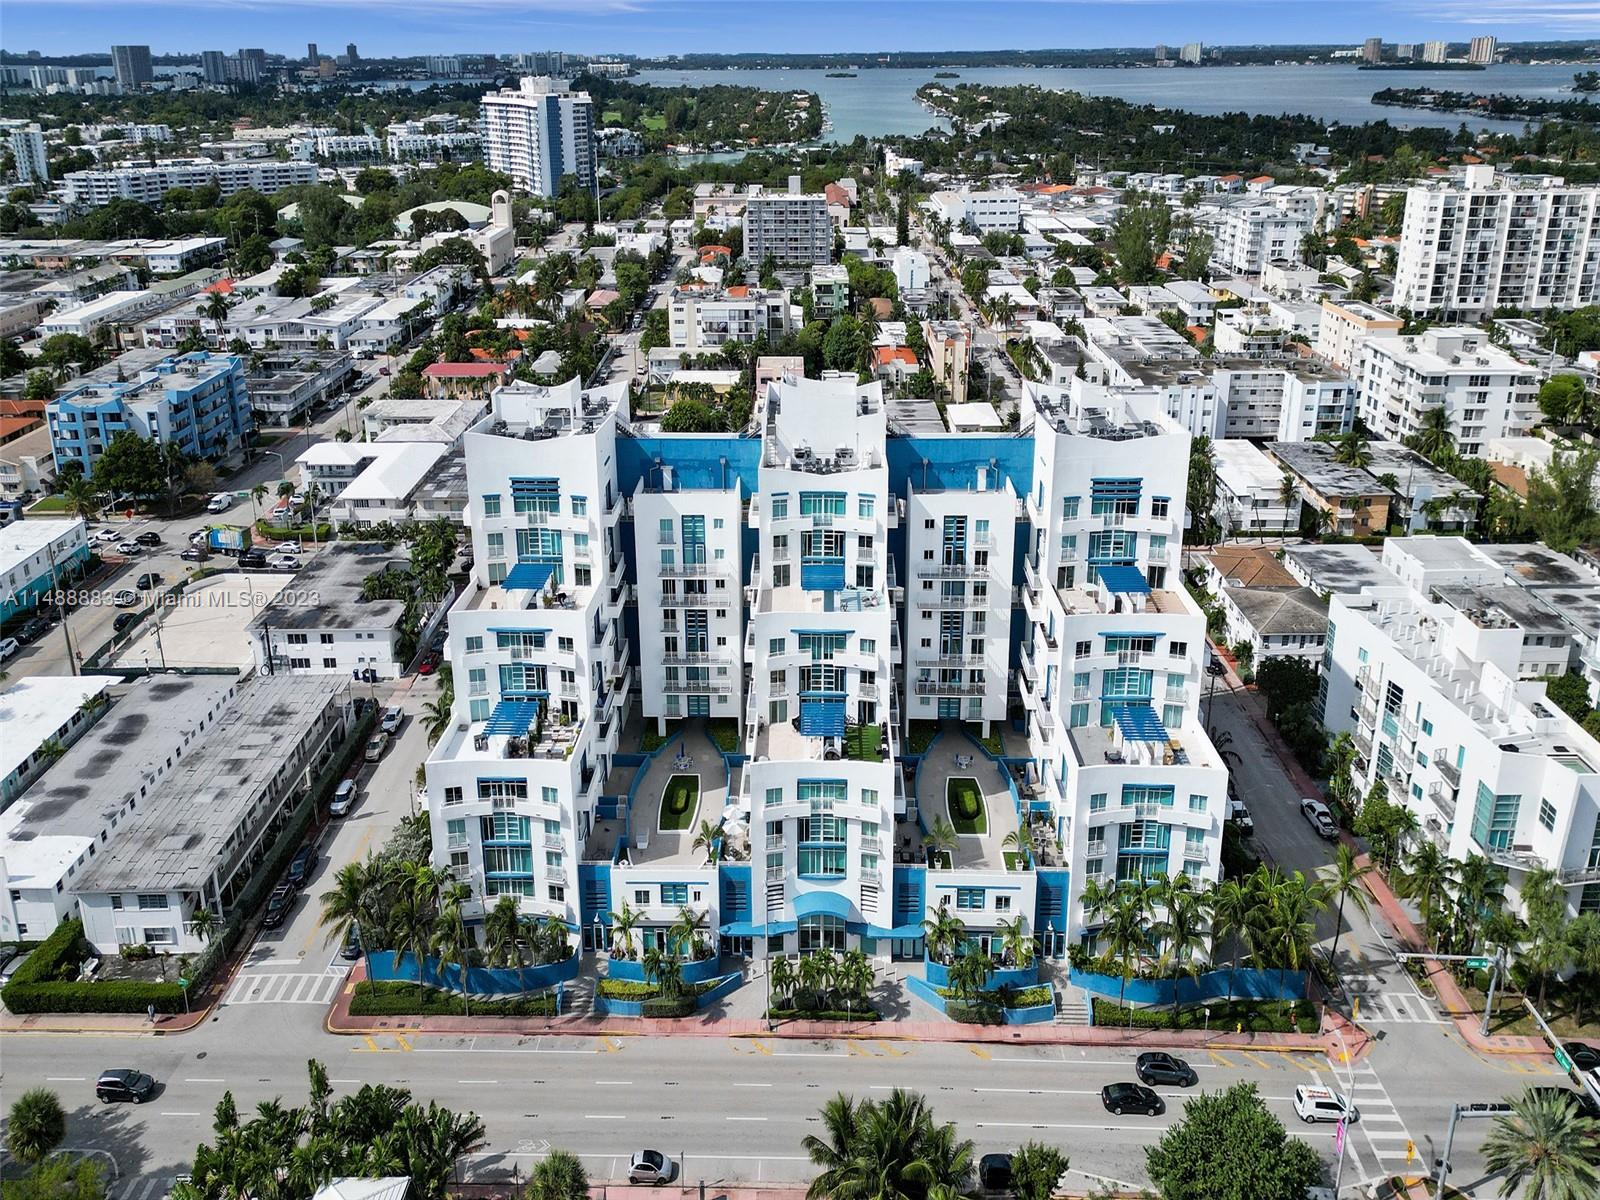 Enjoy penthouse living in the heart of Miami Beach. This one-of-a-kind luxury condominium, located in the majestic OceanBlue, offers spectacular views from its private balconies and resort-style amenities including a heated pool, sauna, jacuzzi, gym, assigned parking, and 24-hour on-site security. Built in 2004 and designed by renowned architect Kobi Karp, this immaculate beauty features spectacular vaulted ceilings, a modern fully-equipped kitchen with granite countertops, in-unit washer & dryer, marble floors, downstairs half-bathroom, and a spacious bedroom loft with an attached full bathroom on the 2nd floor. With the Altos del Mar Park and Atlantic Ocean at your doorstep, don’t miss this opportunity to live in your tropical paradise!